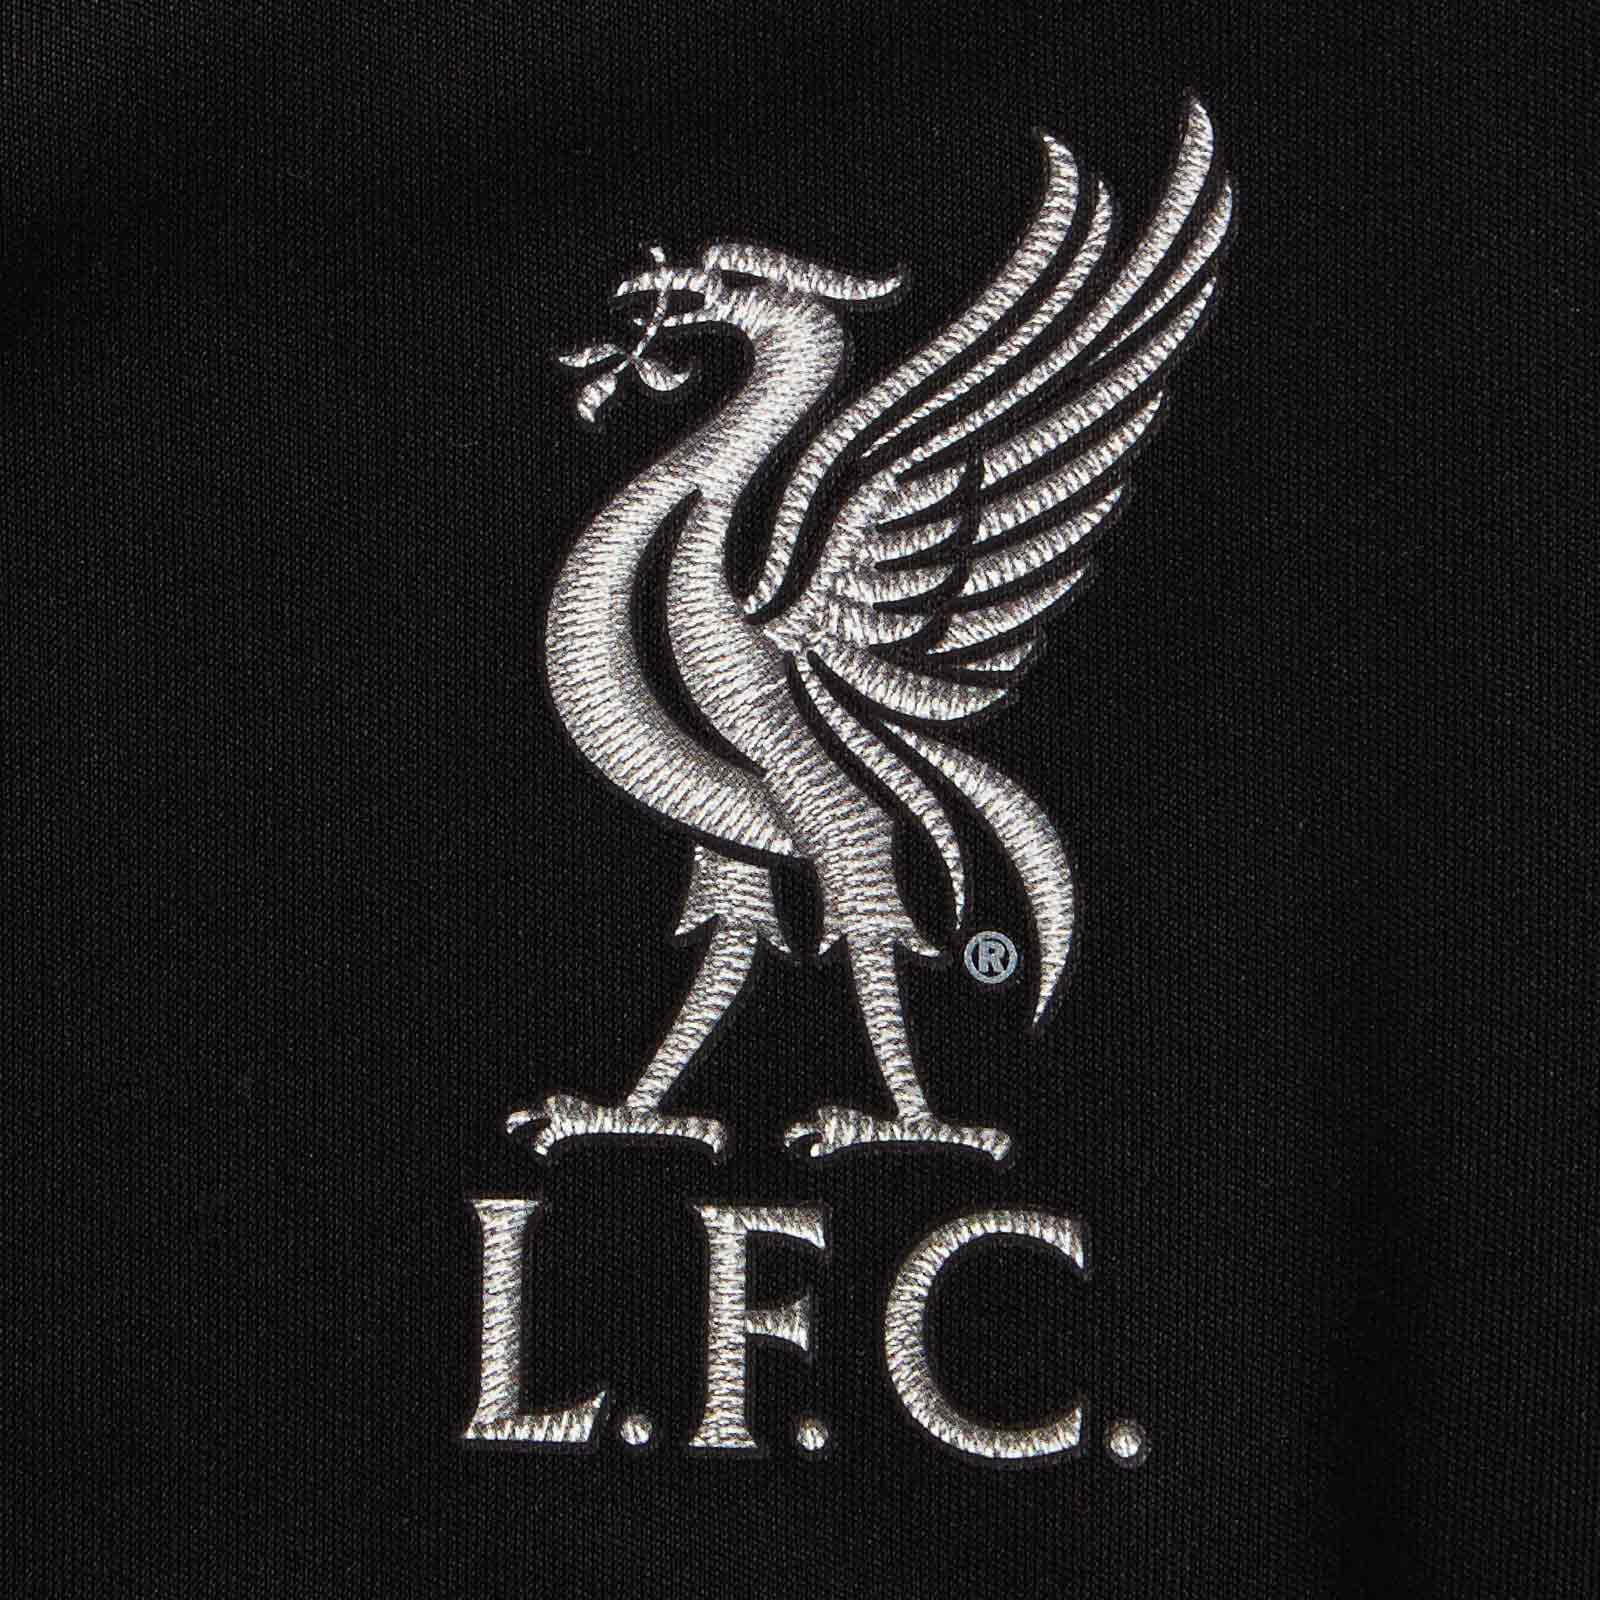 Liverpool 201617 Away Kit Launched